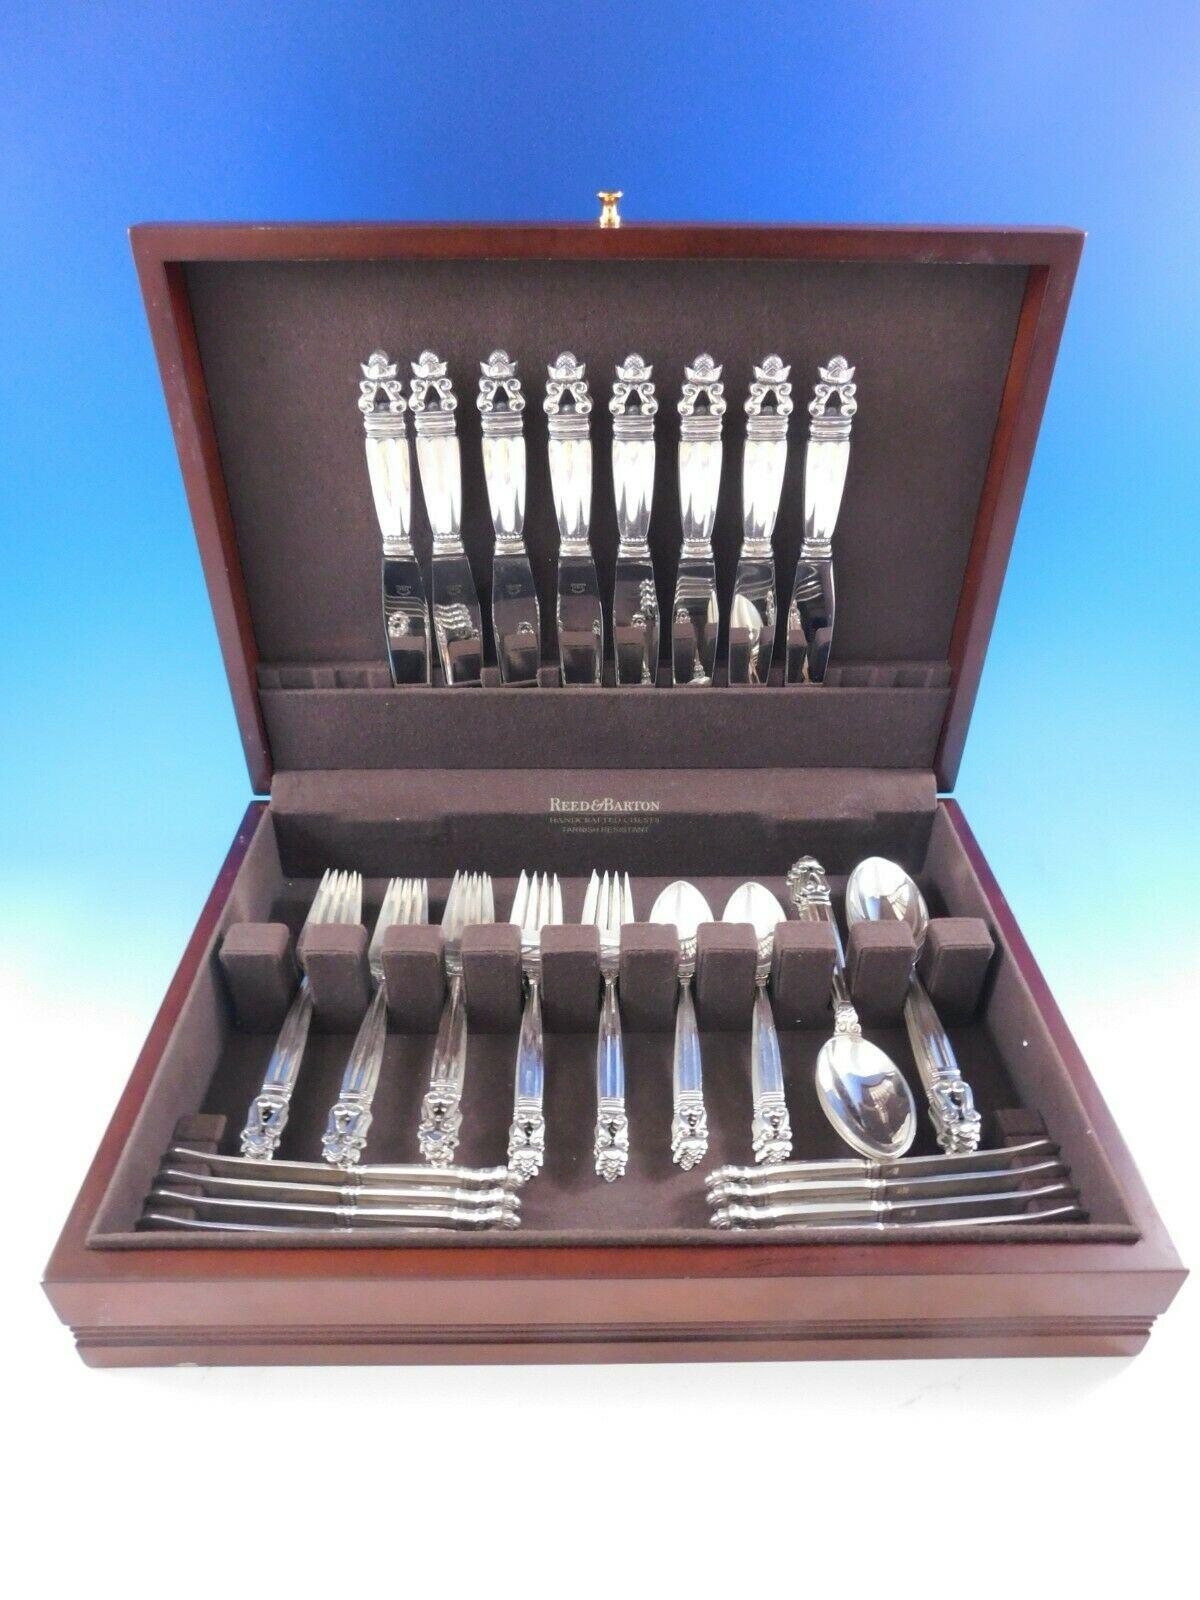 Dinner size Acorn by Georg Jensen sterling silver flatware set, 48 pieces. This set includes:

8 dinner knives, 9 1/8